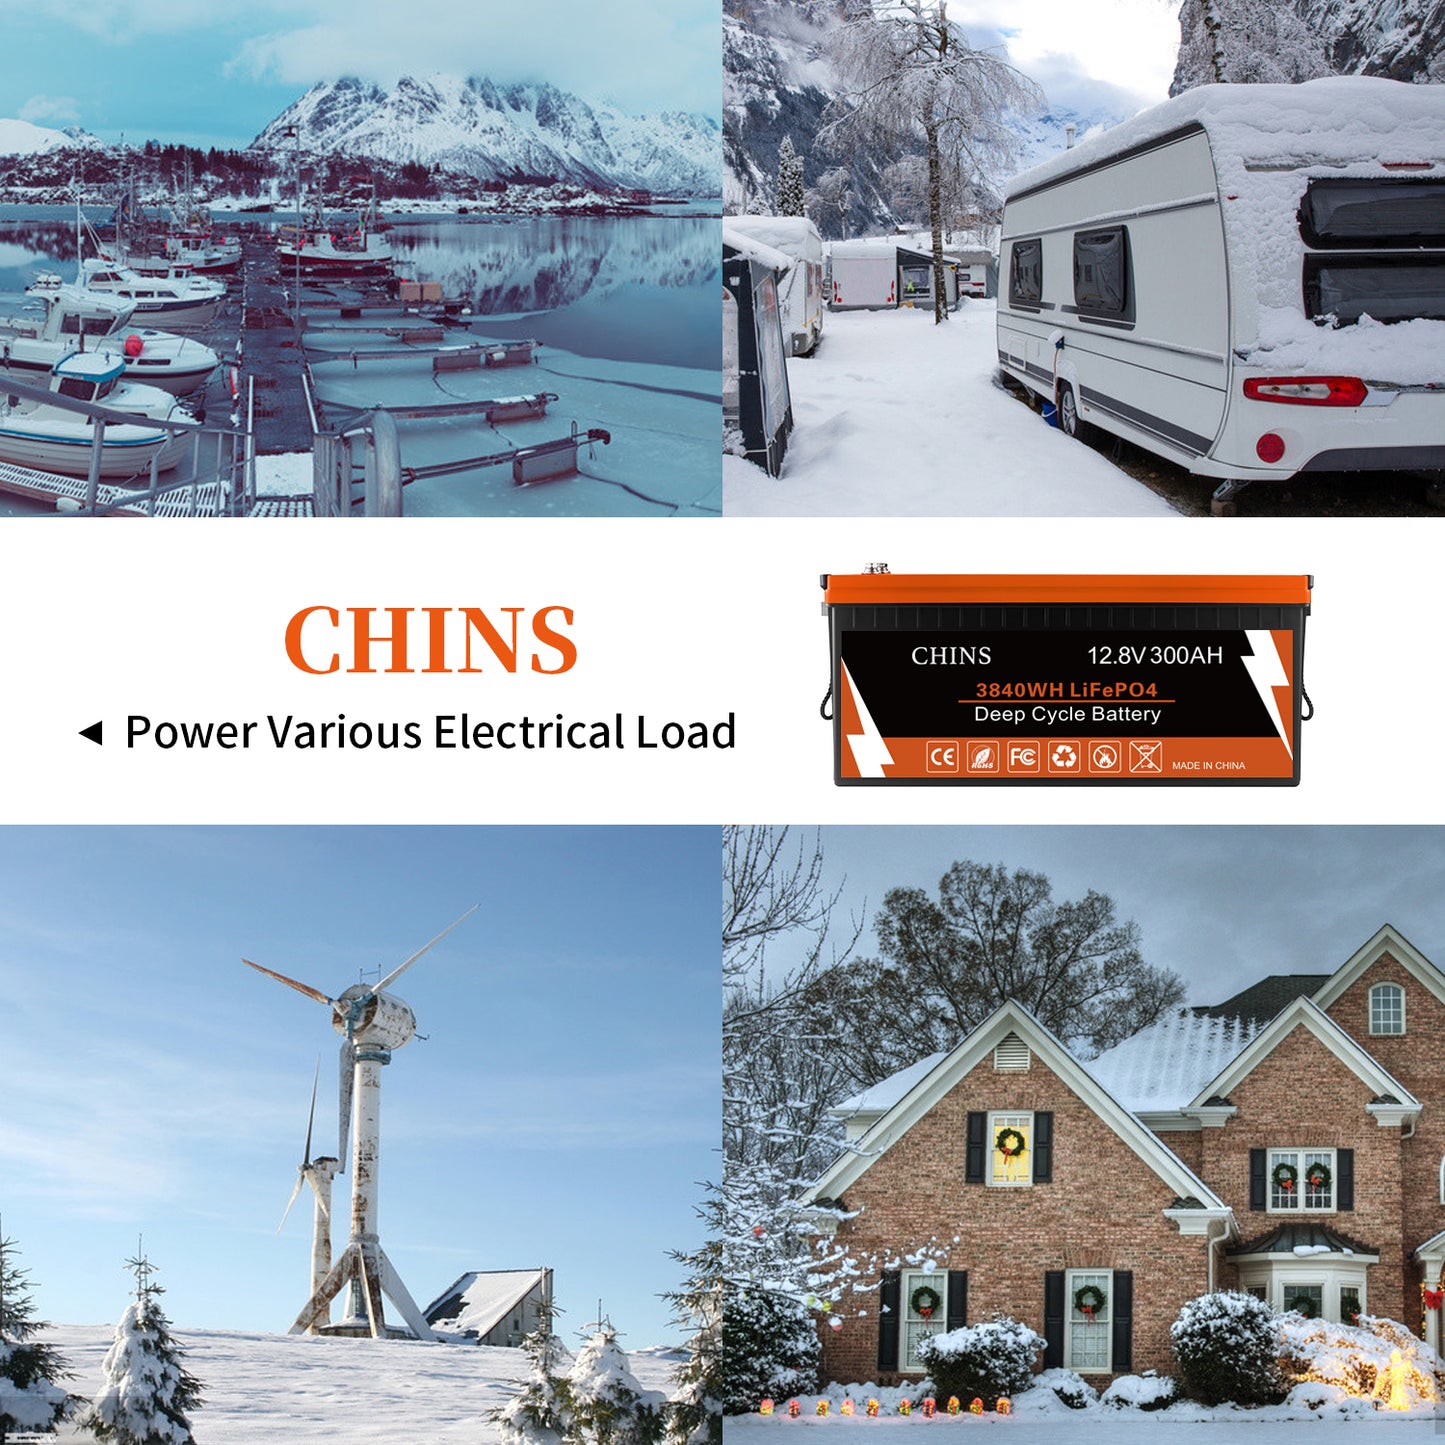 CHINS Smart 12.8V 300Ah LiFePO4 Battery, Support Low Temperature Charging (-31°F), Built-in 200A BMS, 2000+ Cycles, Mobile Phone APP Monitors Battery SOC Data